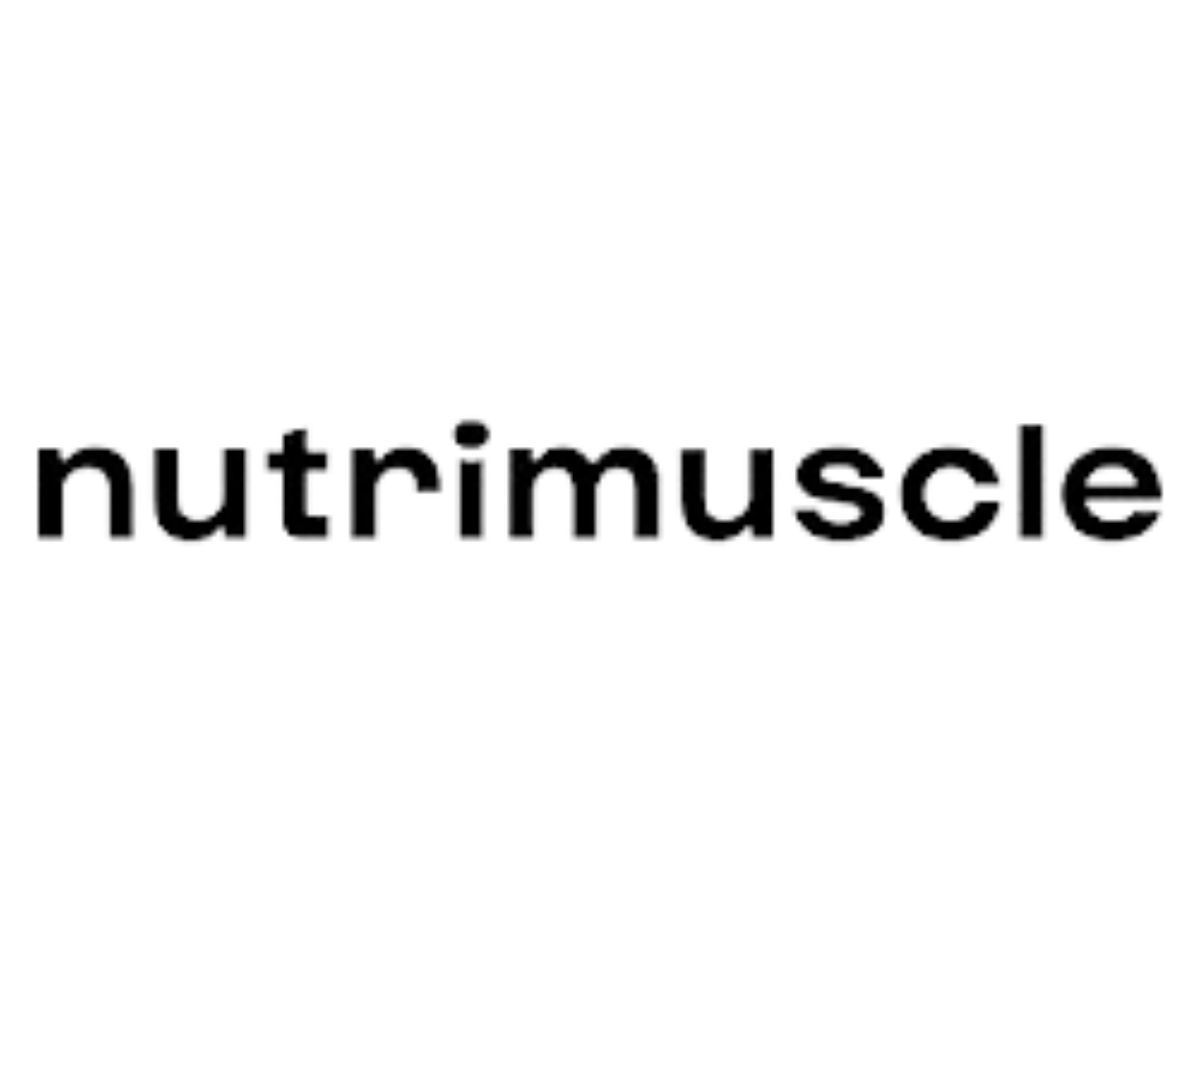 Nutrimuscle-1692009295.png